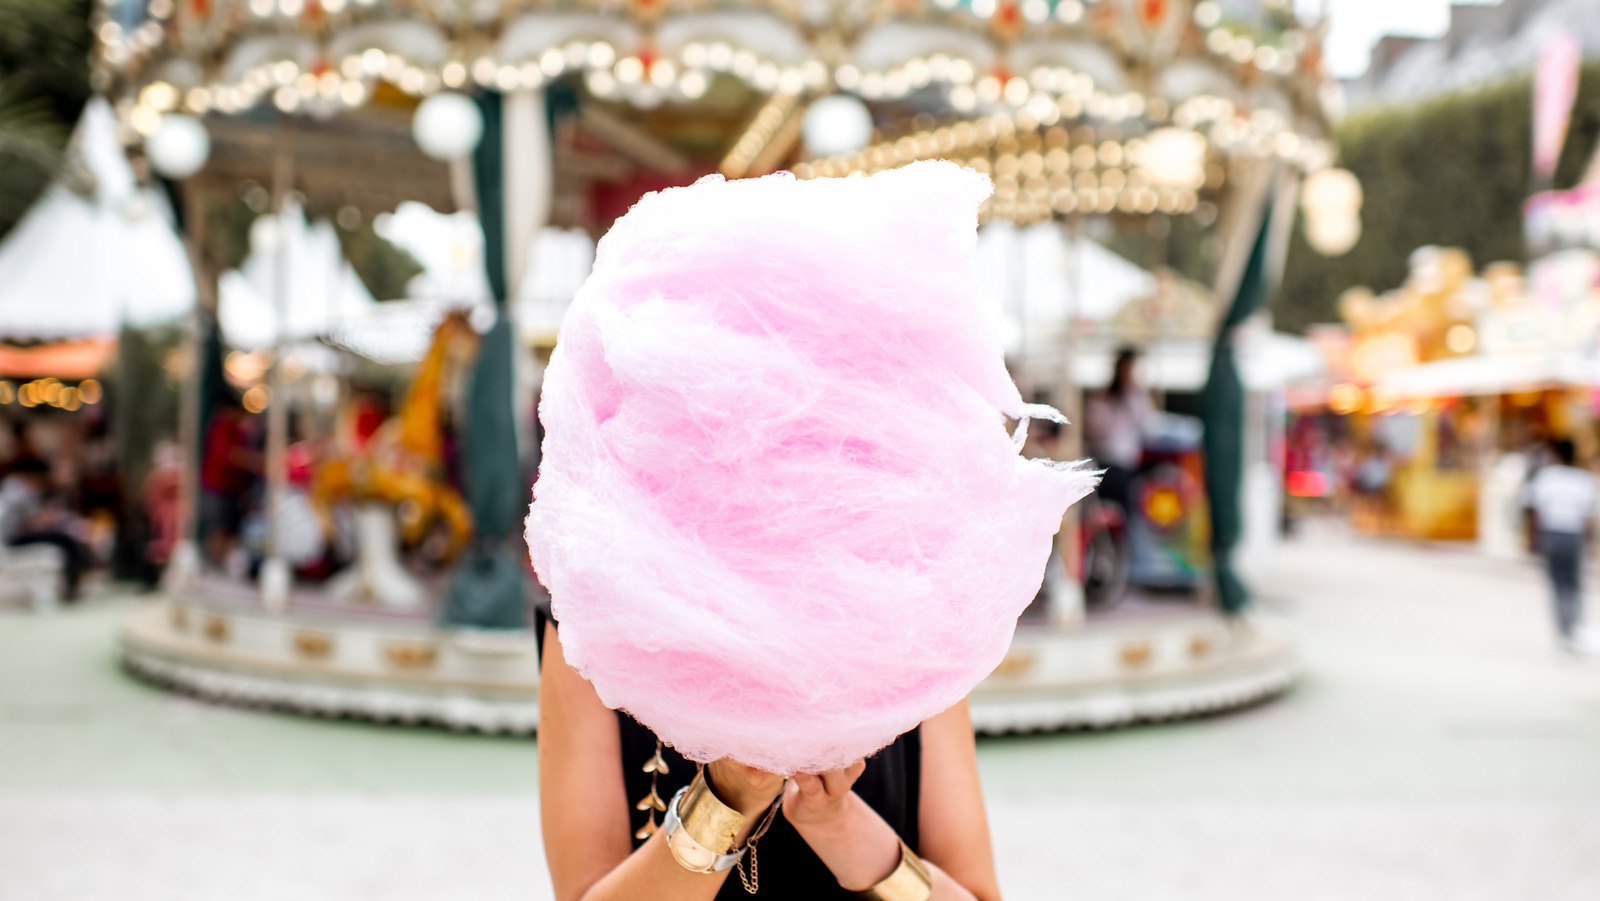 Why The Origin Of Cotton Candy Is So Surprising